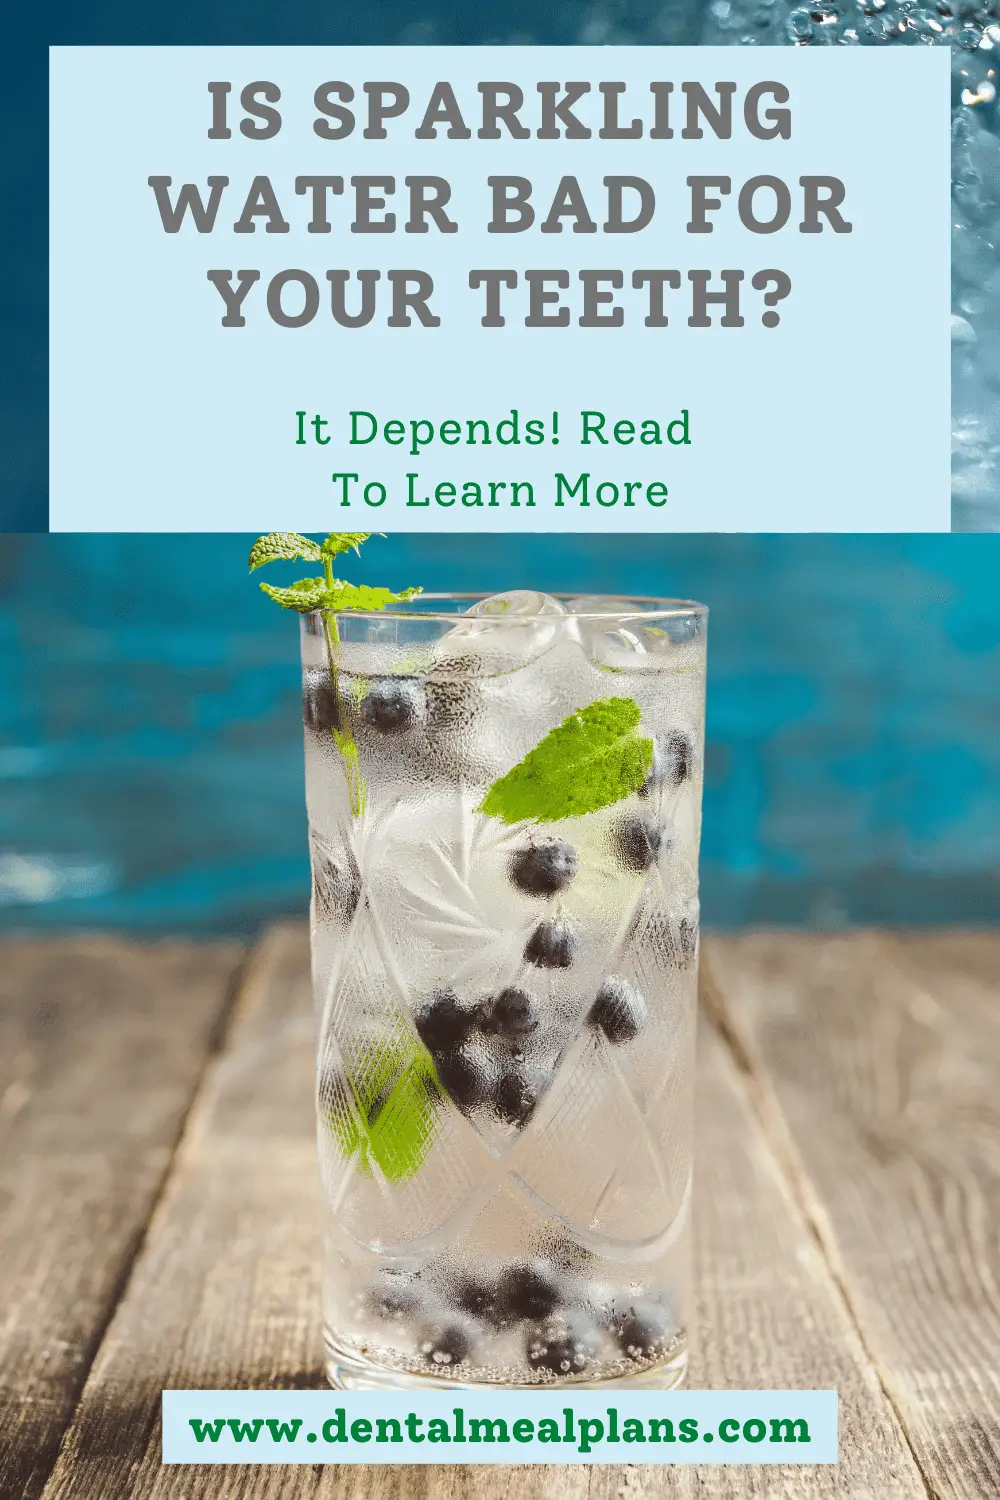 Is sparkling water bad for your teeth? It depends! Read to learn more. Graphic